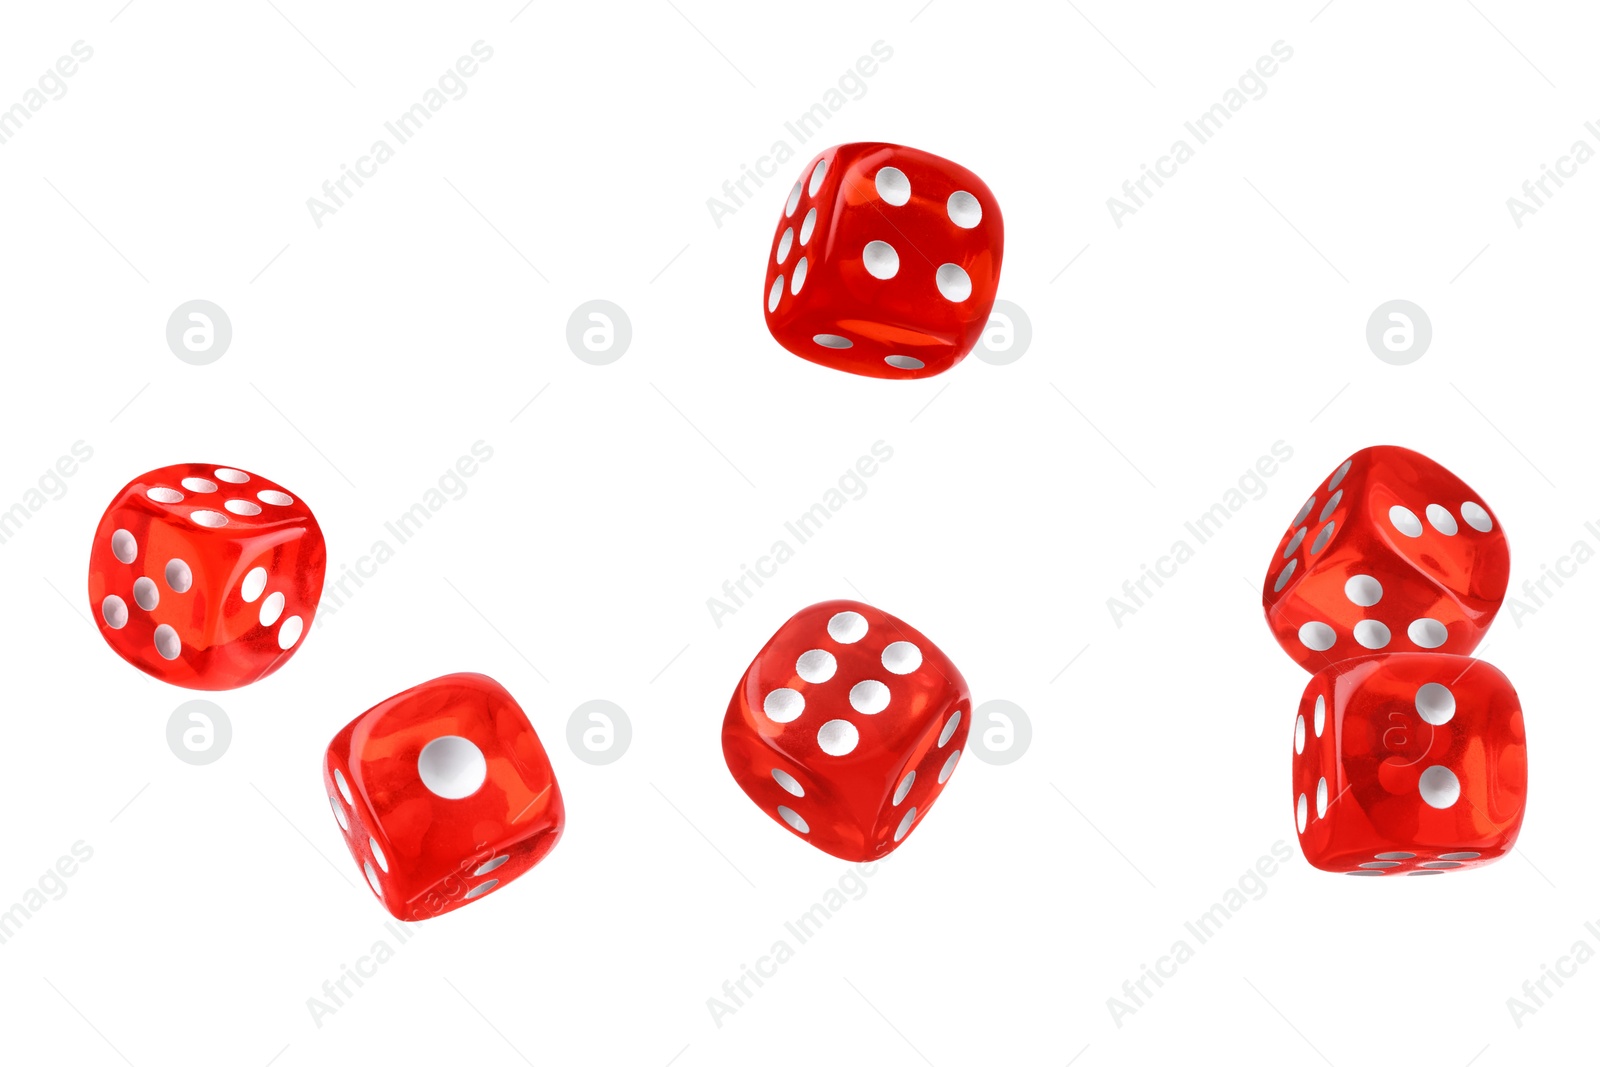 Image of Six red dice in air on white background